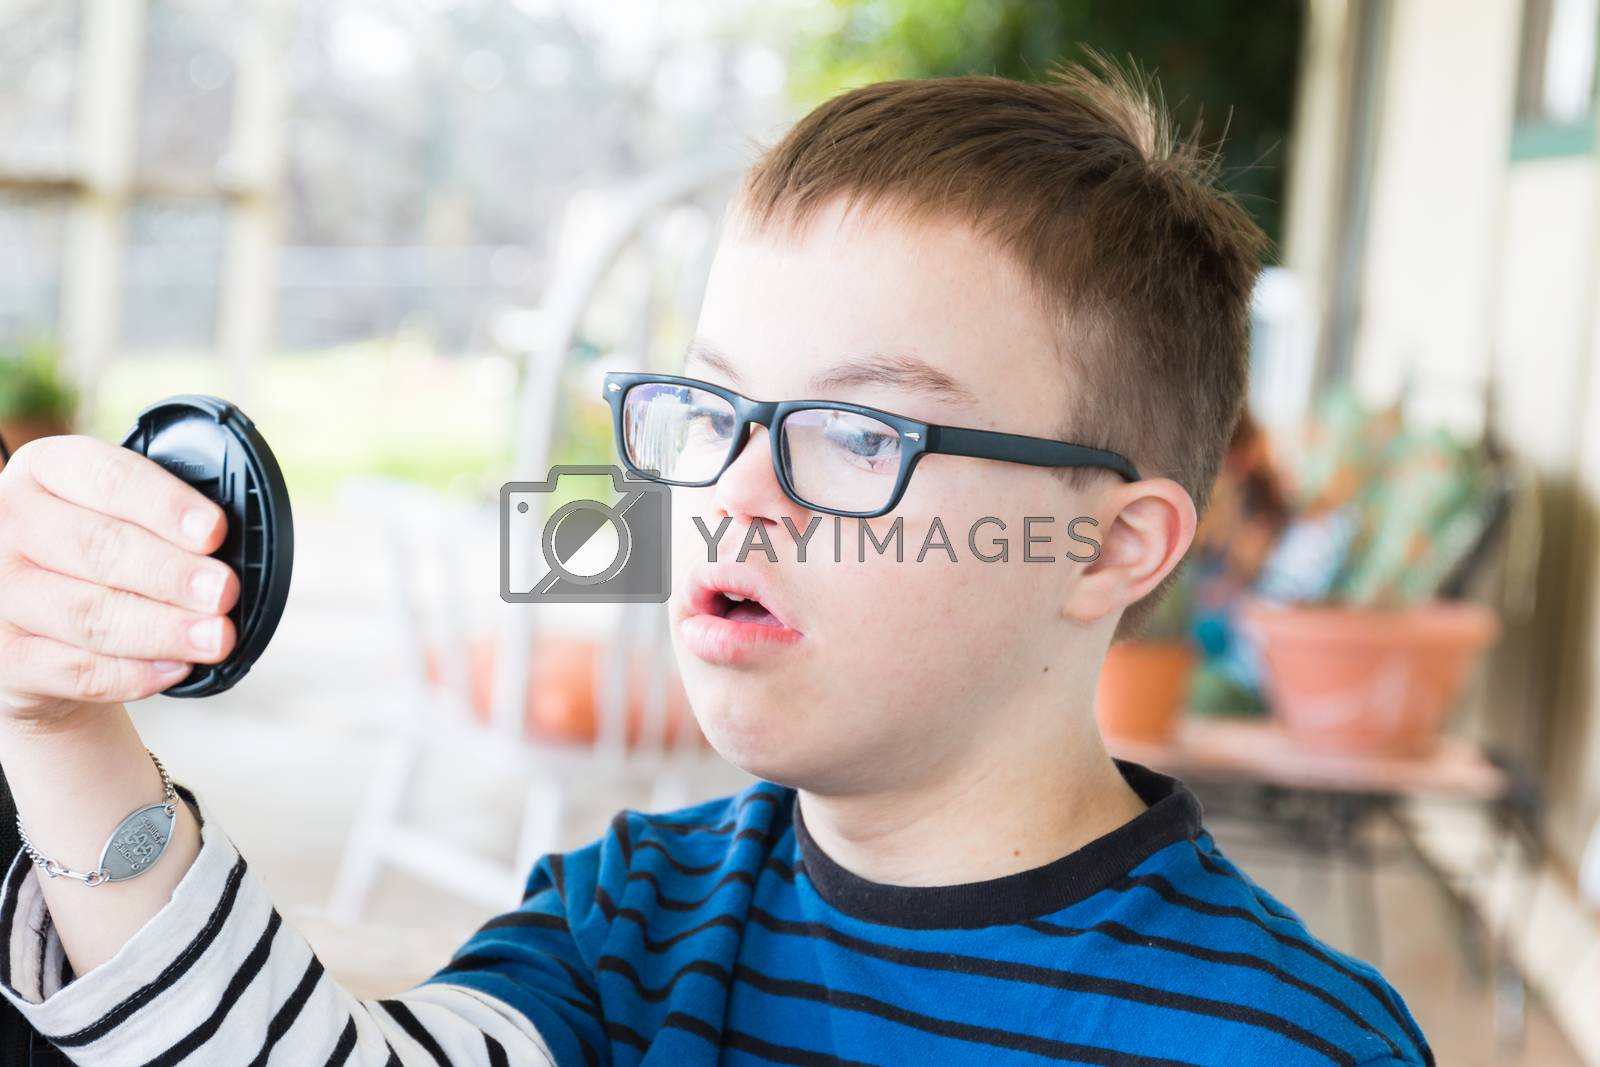 Royalty free image of Young Boy With Downs Syndrome by gregorydean